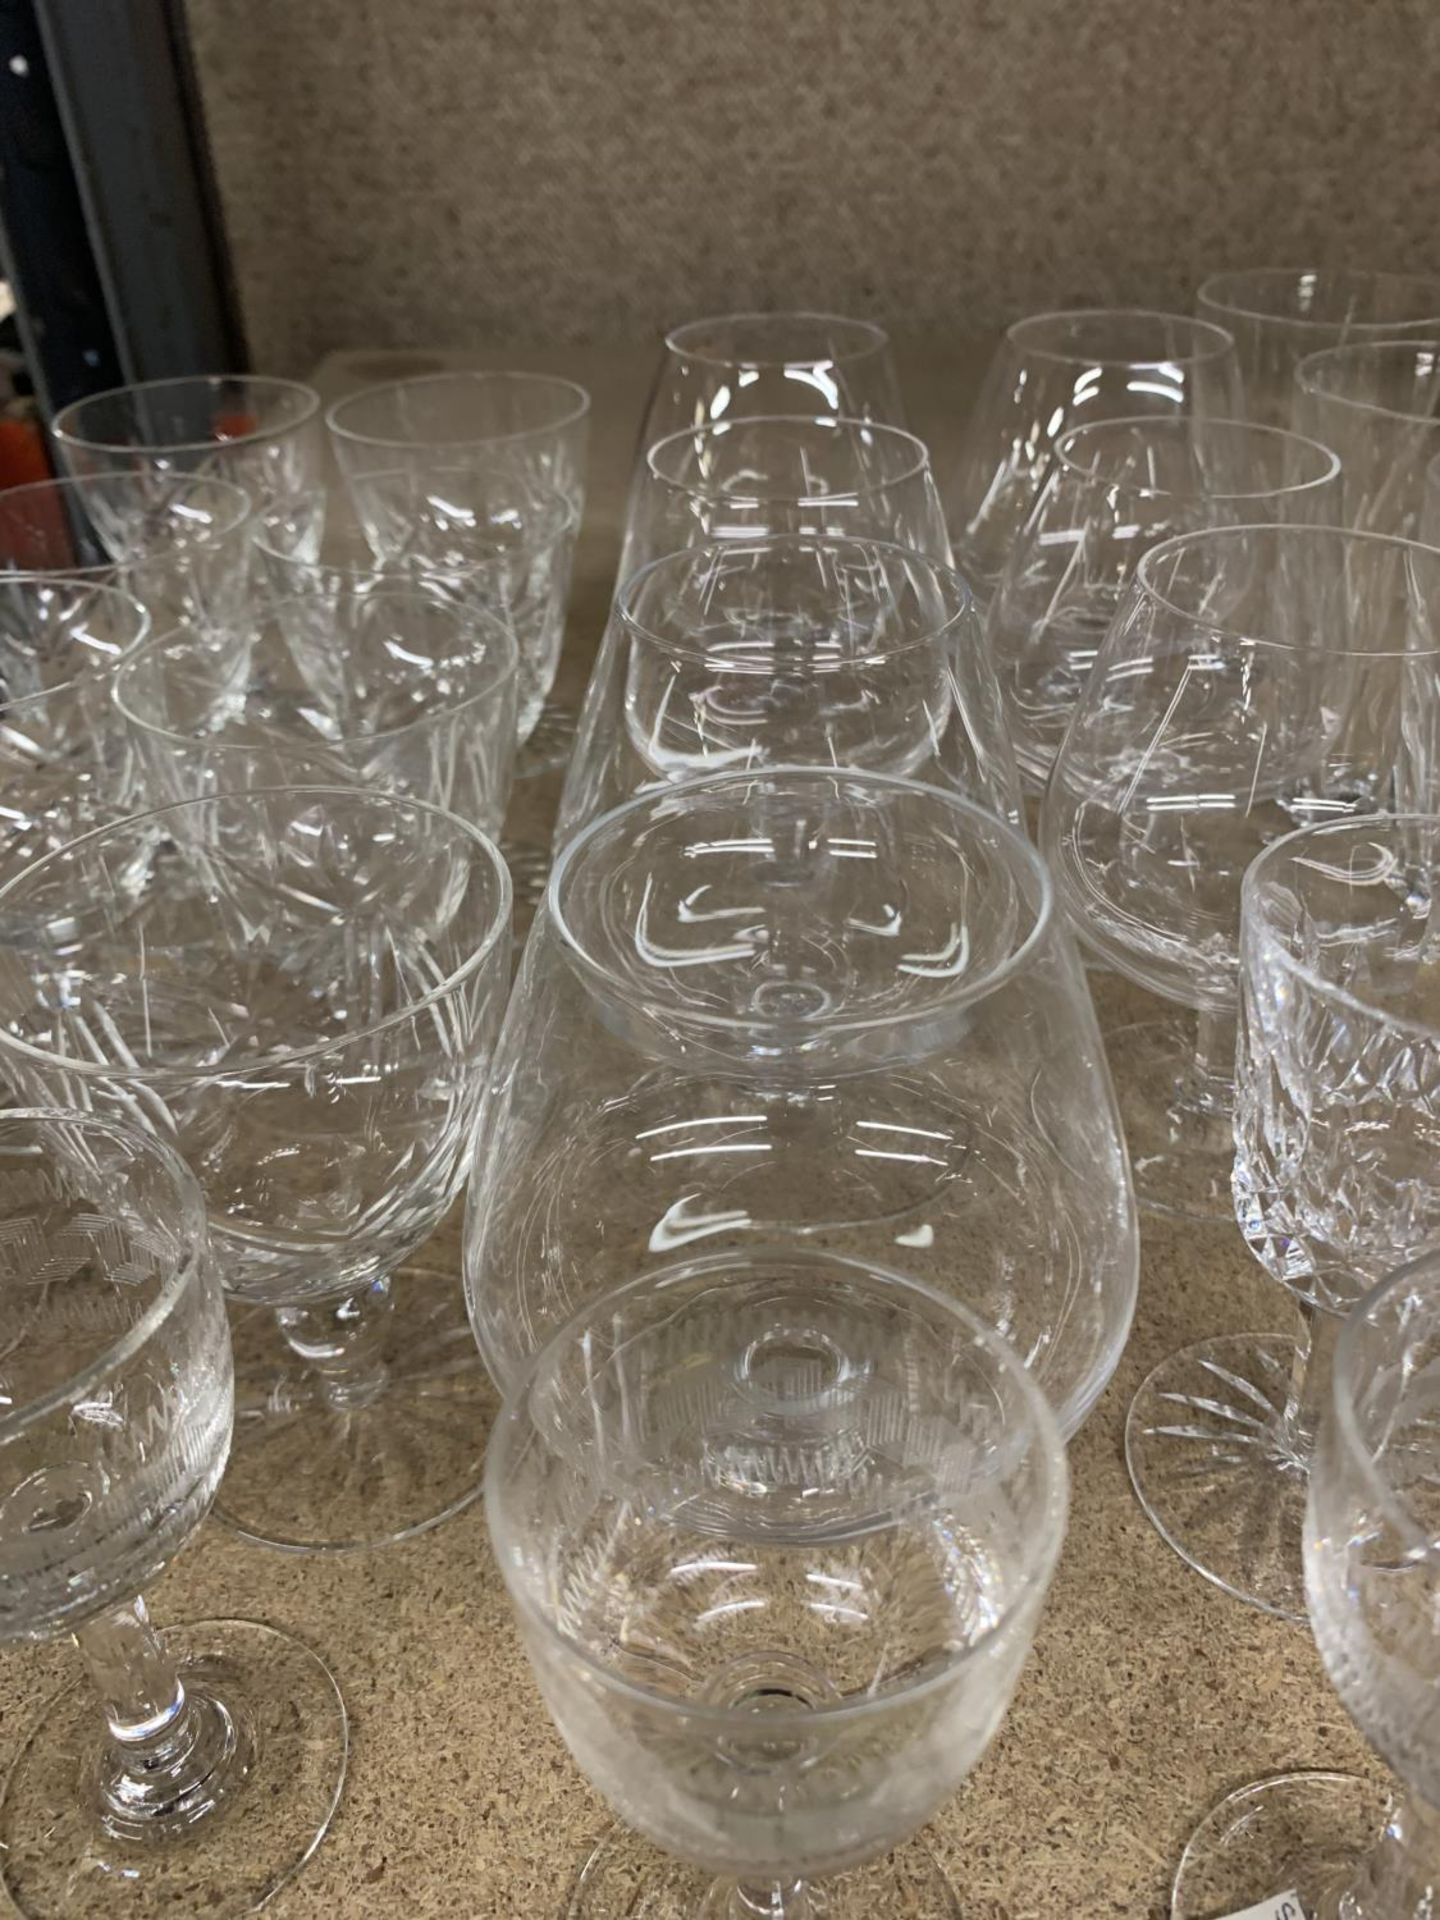 A QUANTITY OF GLASSES TO INCLUDE WINE, BRANDY, SHERRY, PORT, TUMBLERS, ETC - Image 3 of 3